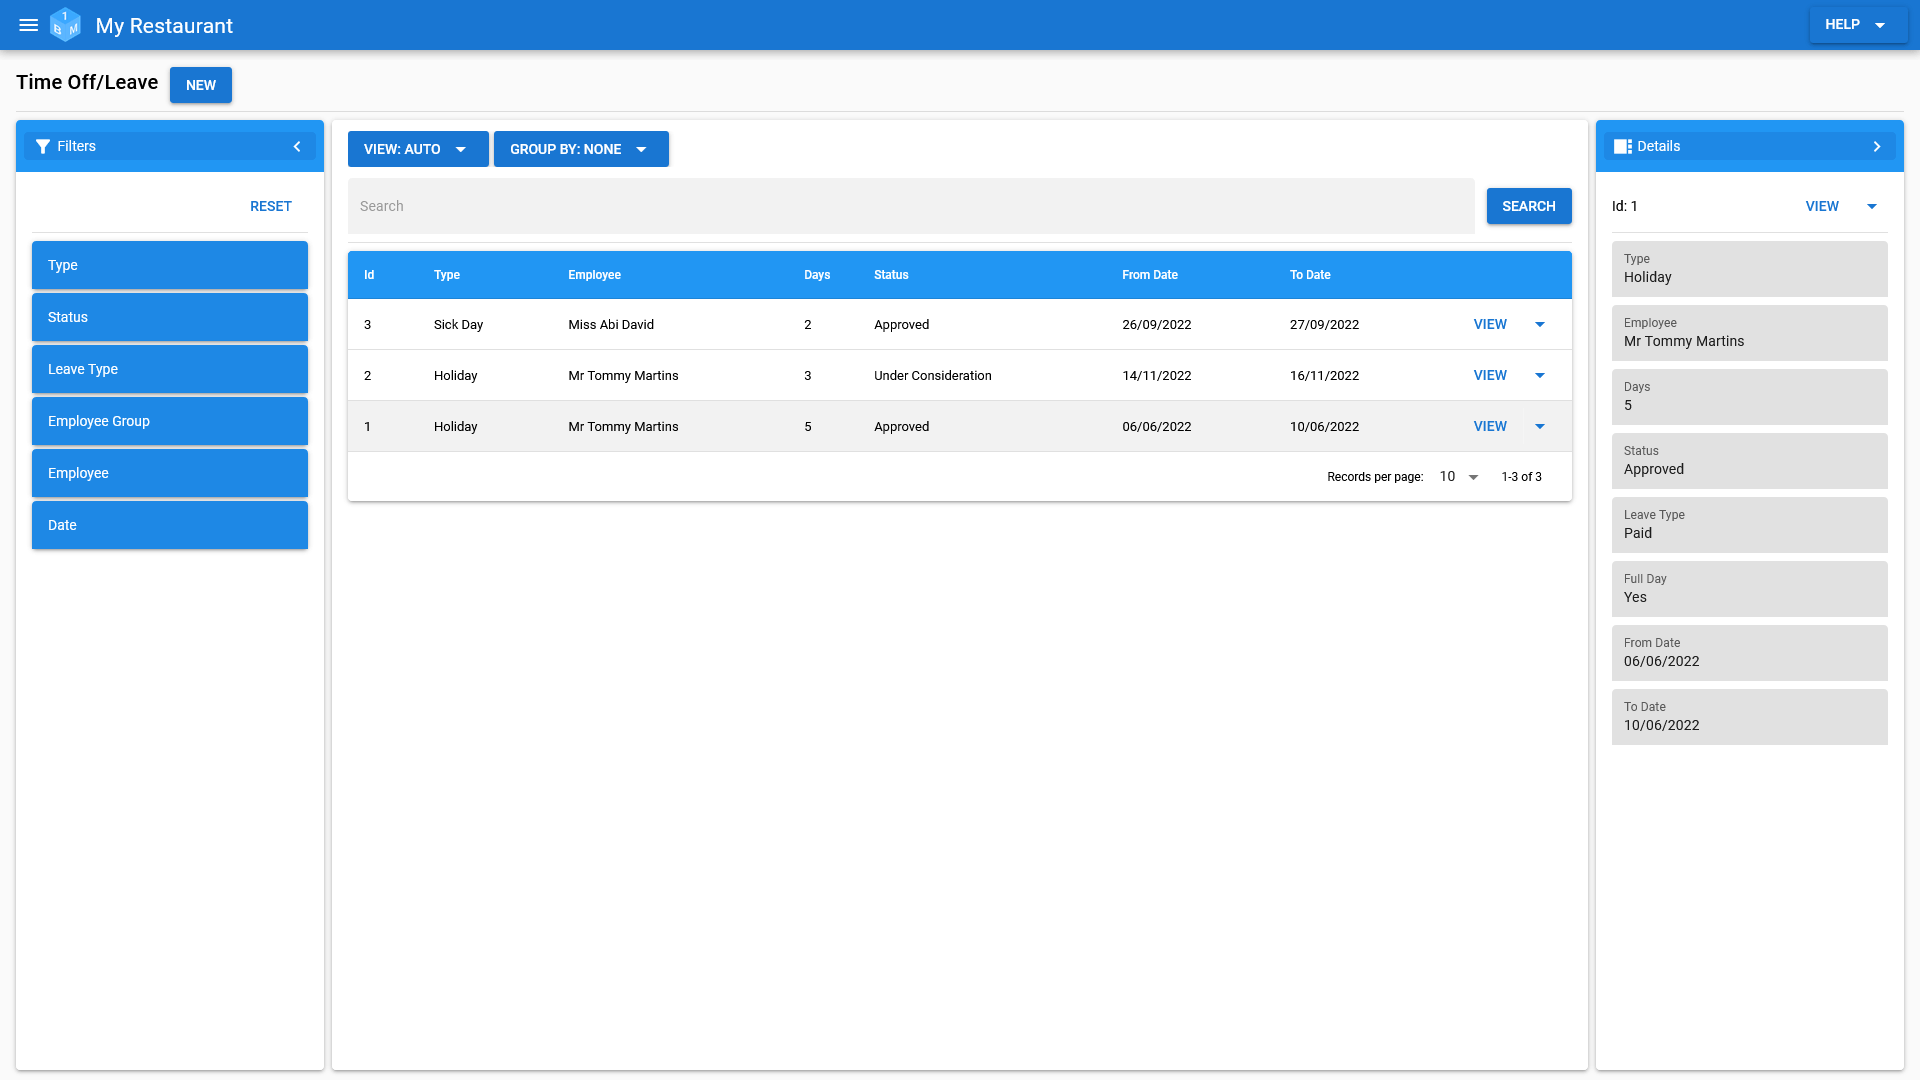 The OneBoxBM Time Off/Leave Request Management screen